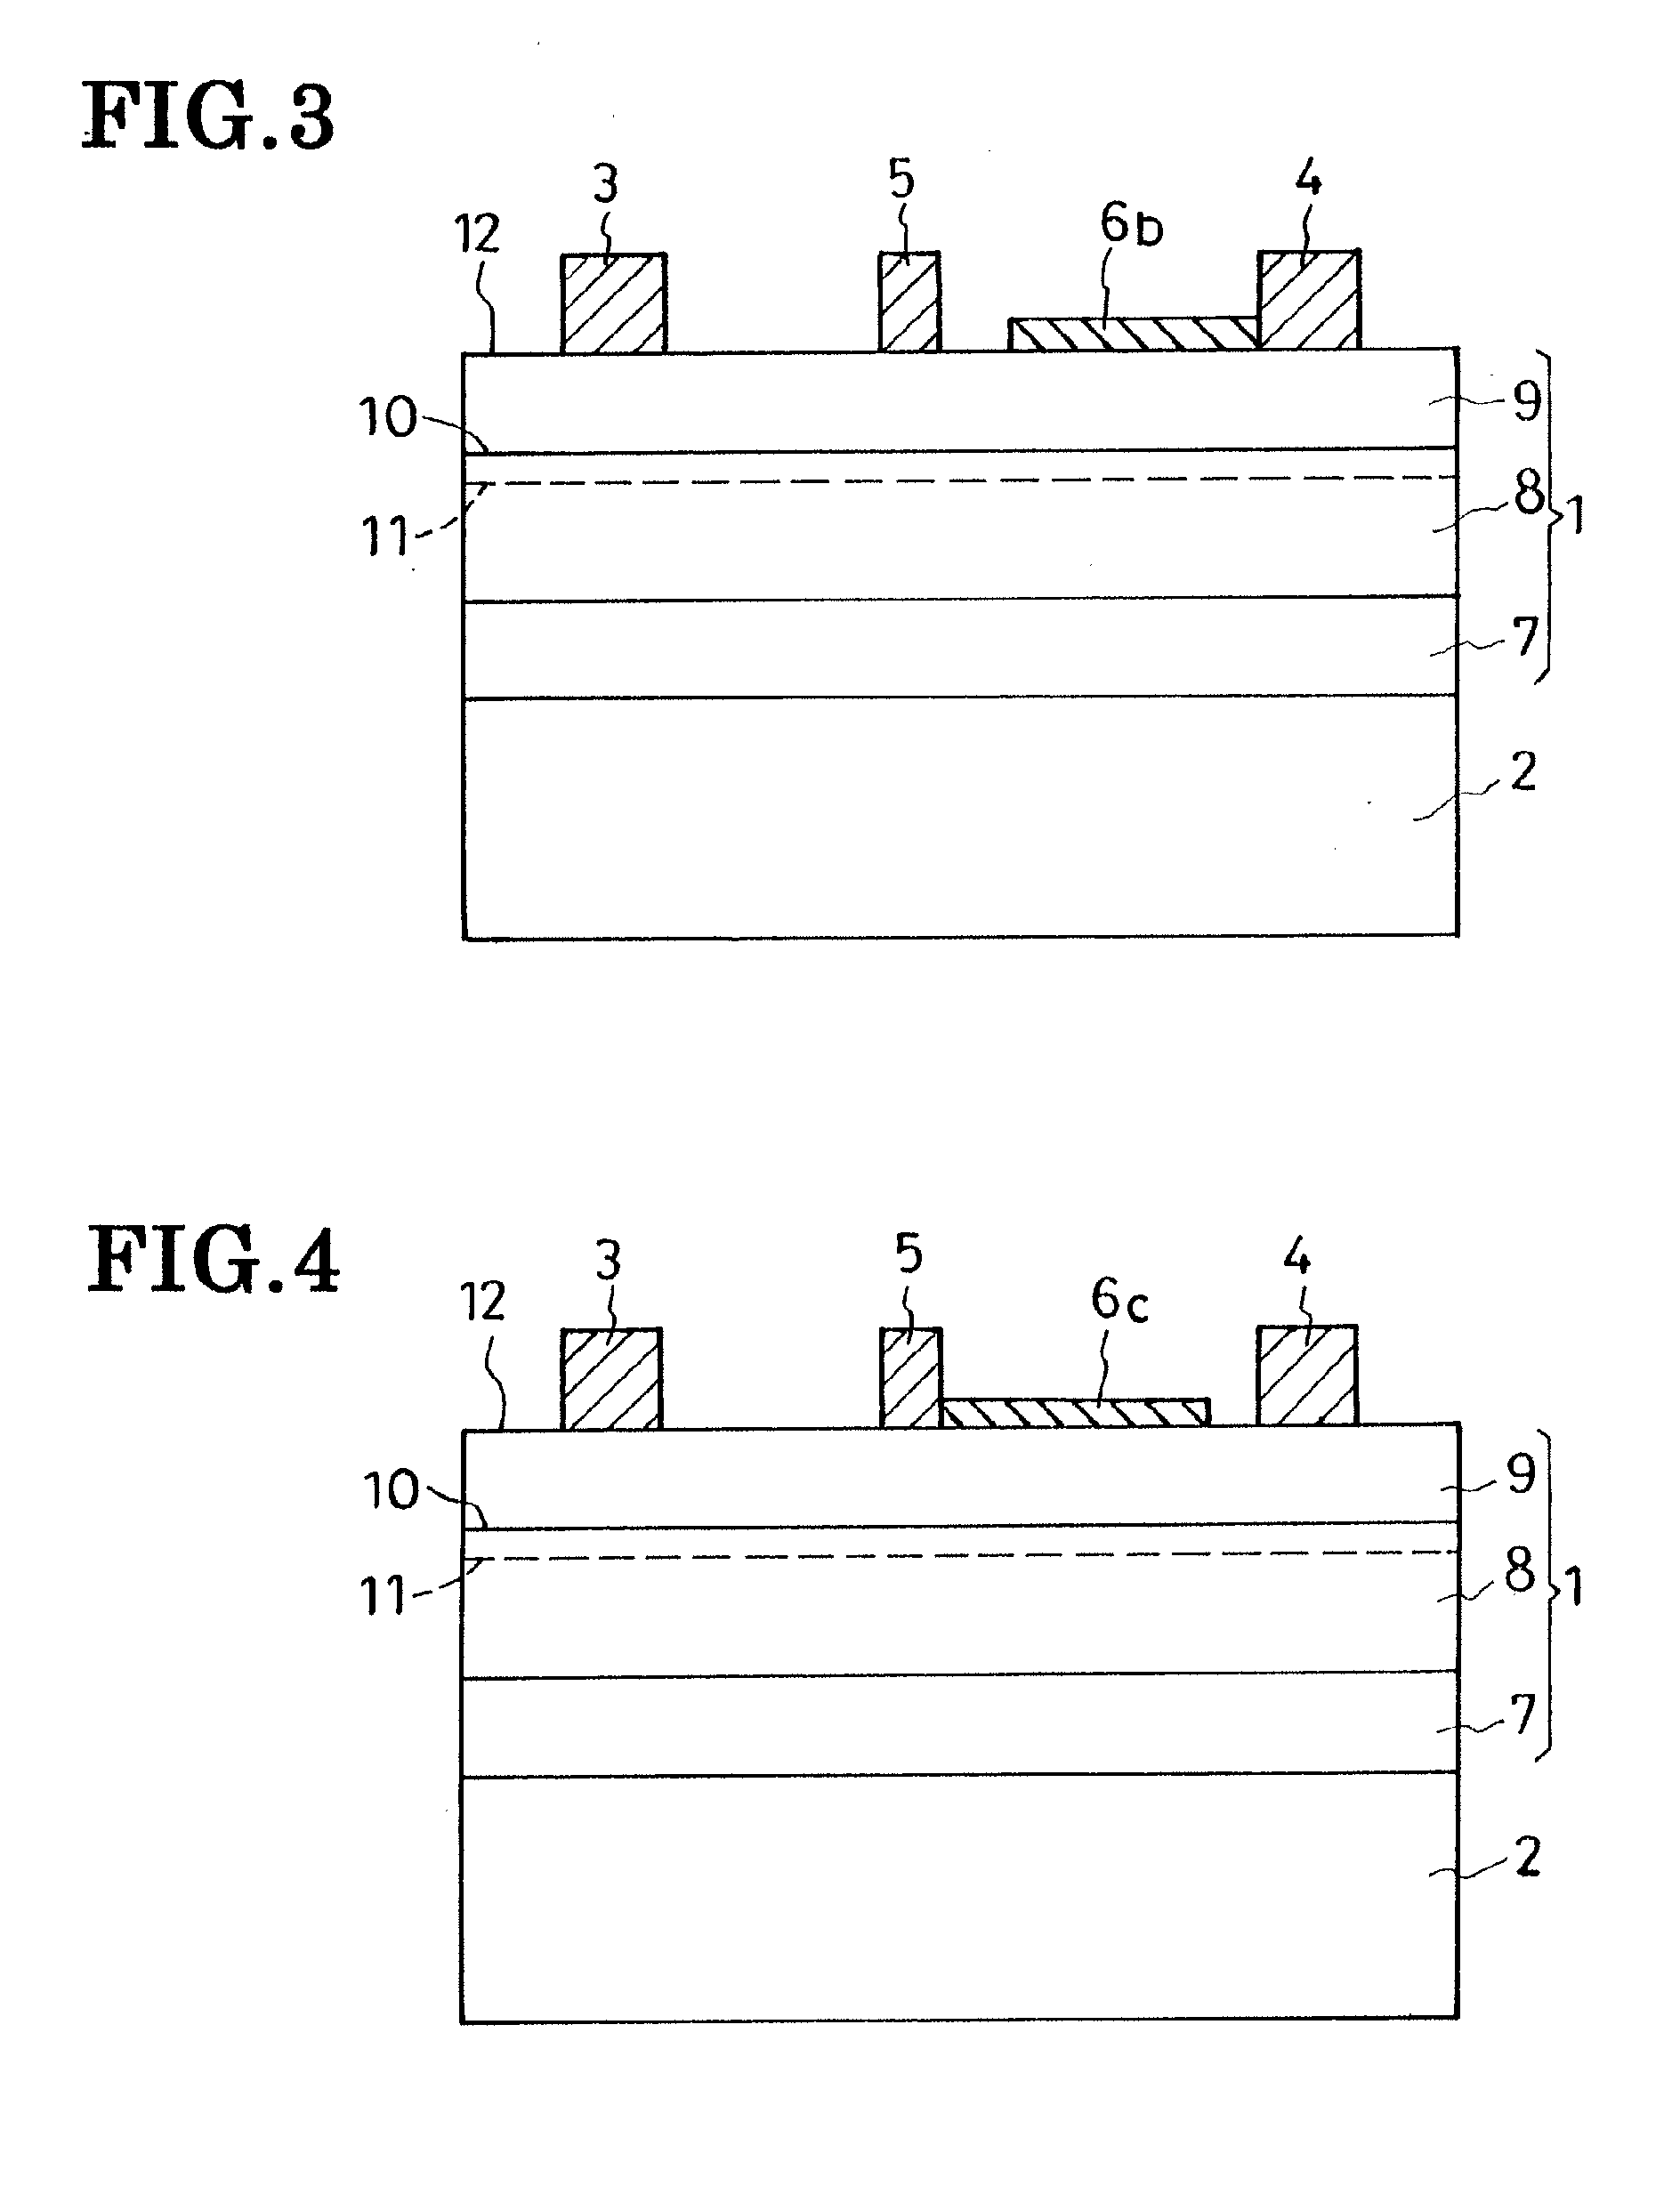 Surface-stabilized semiconductor device